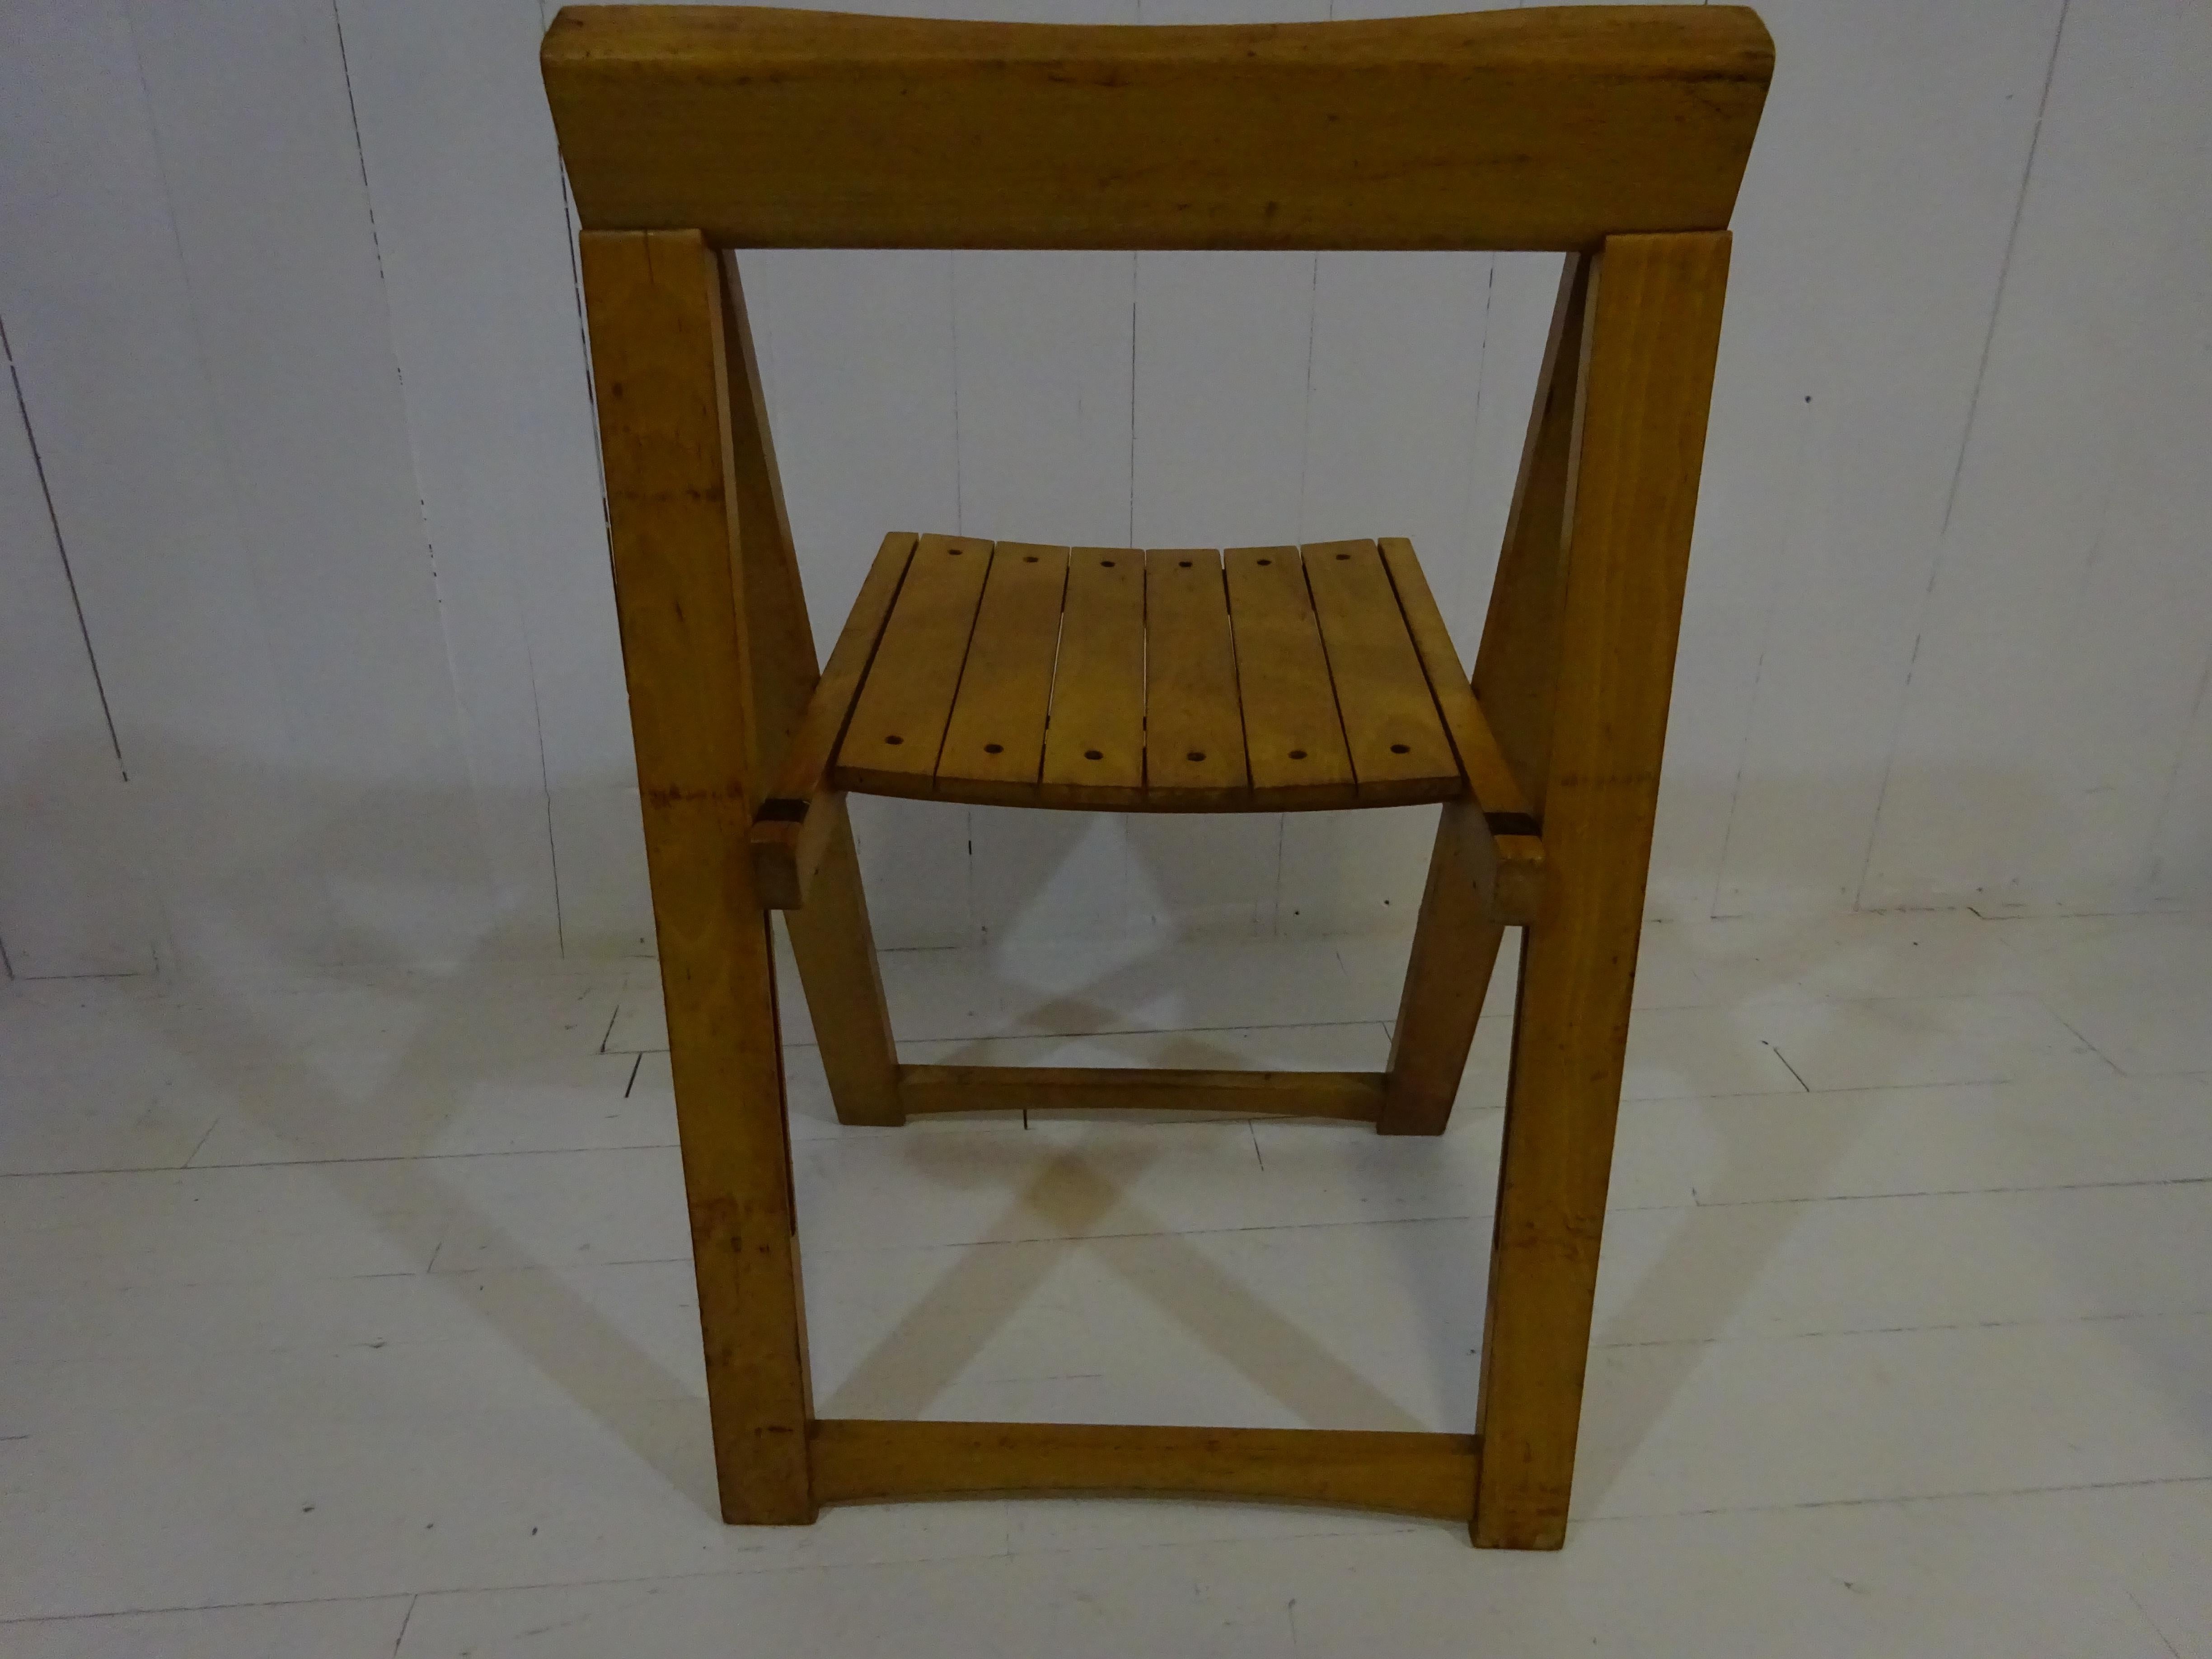 Varnished Aldo Jacober Folding Chair Italy, 1960's For Sale